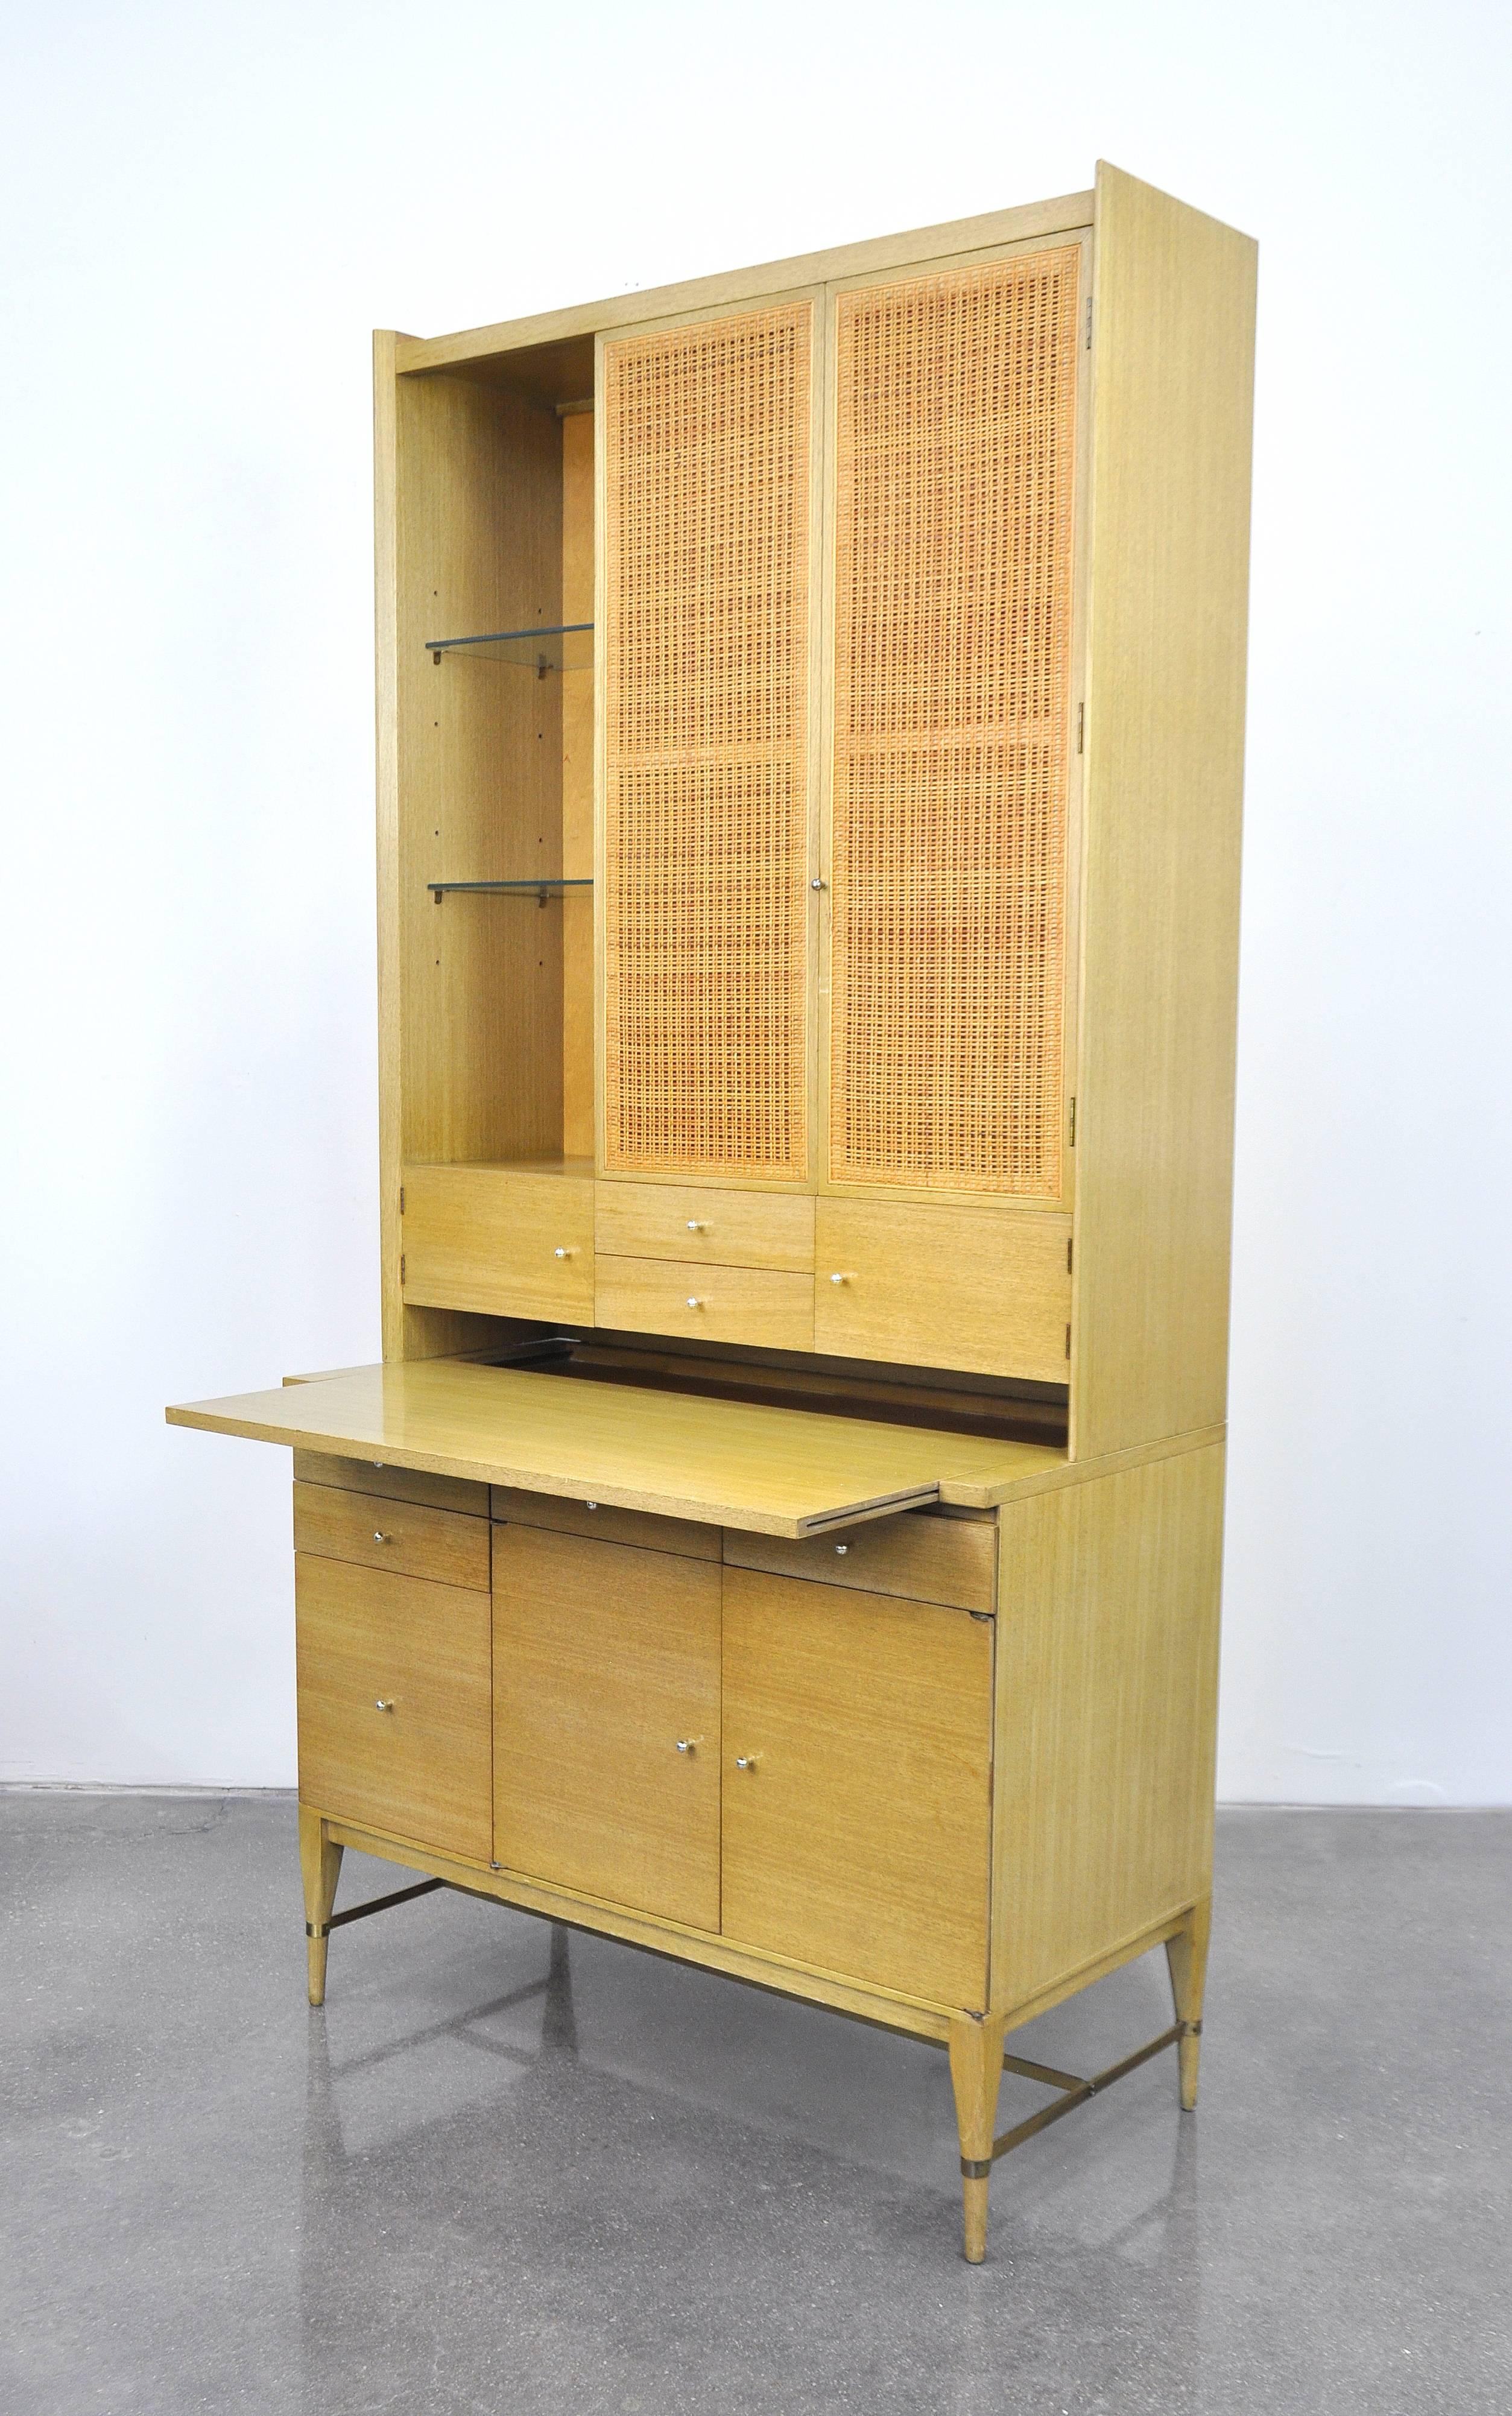 All original Mid-Century Modern bar cabinet, designed by Paul McCobb for Directional's Connoisseur Collection, and manufactured by H. Sacks and Sons in circa 1953. It can also be used as a cupboard, server buffet or as a desk and bookcase, as it